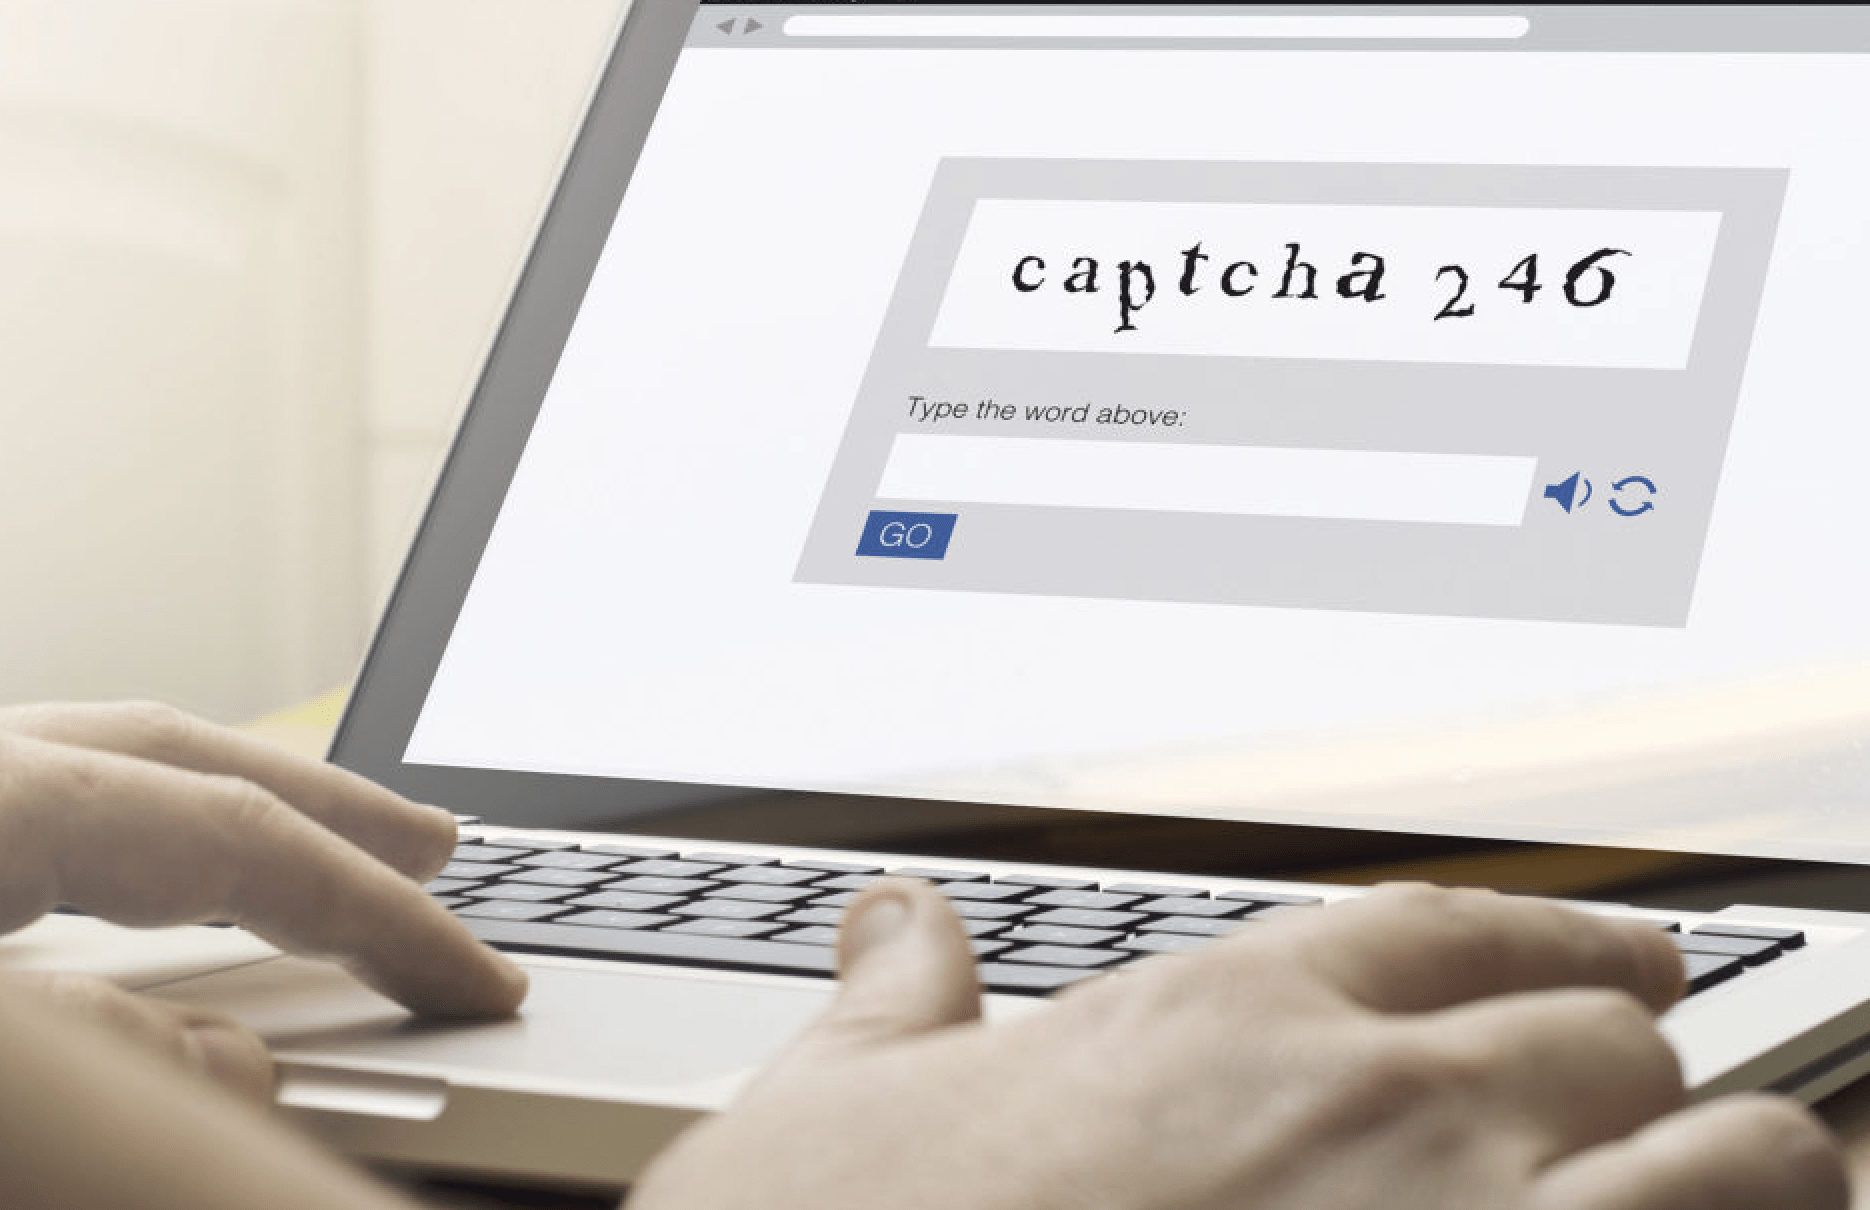 Vulnerability of CAPTCHA Systems Using Bots with Computer Vision Abilities